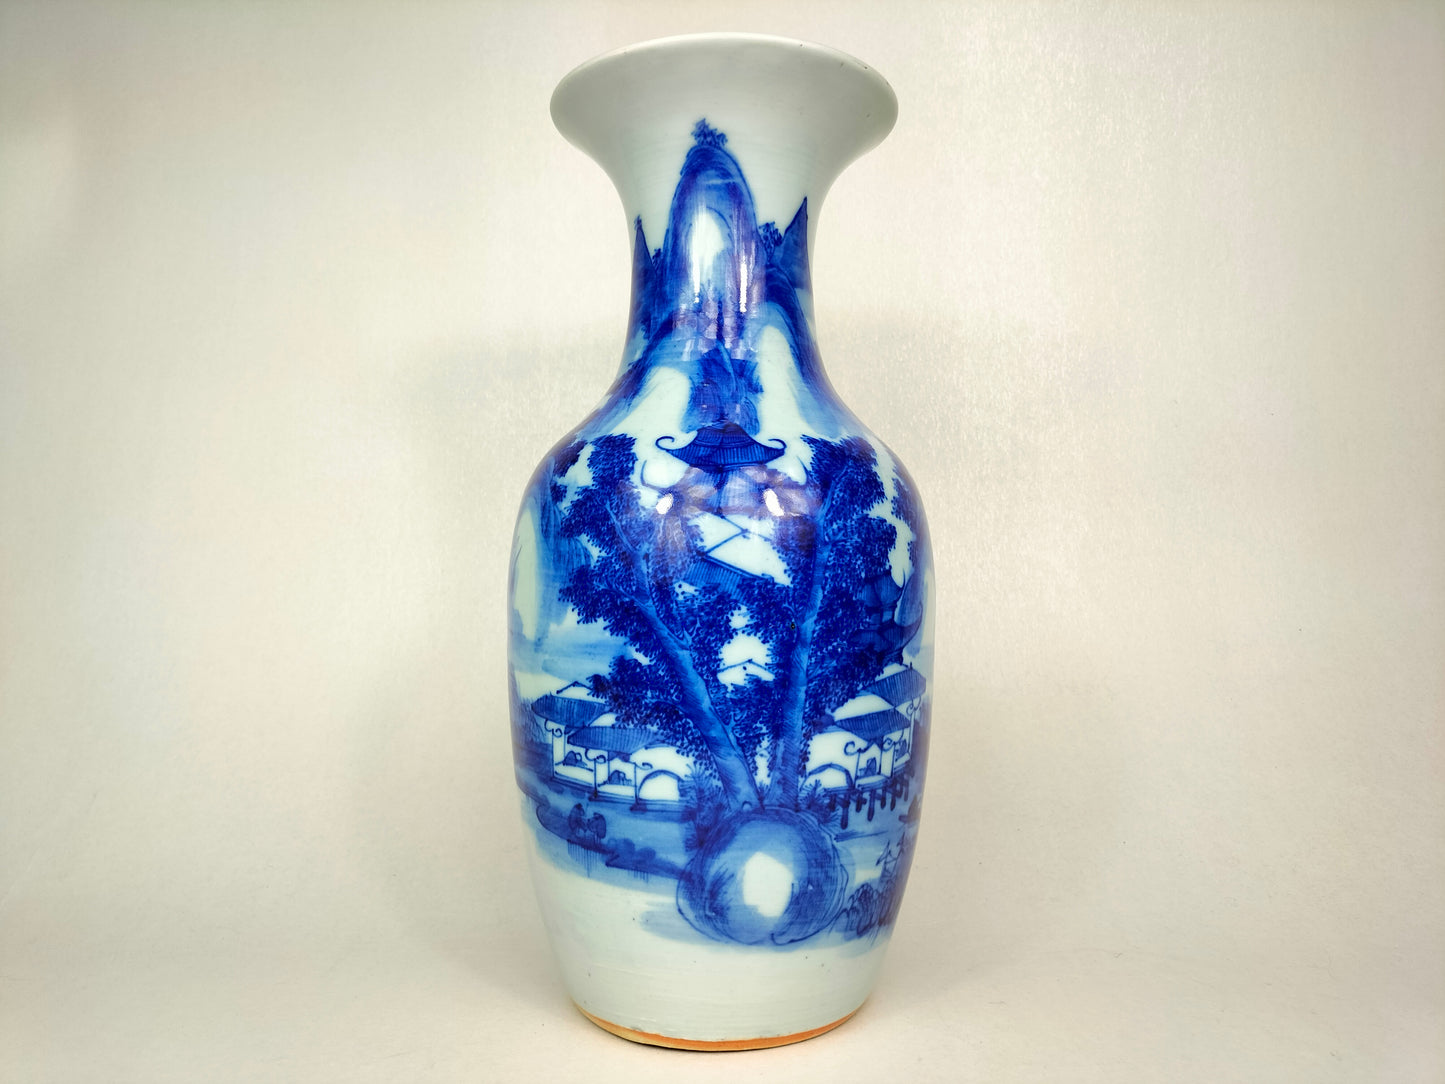 Antique 19th century blue white qing dynasty vase decorated with landscape